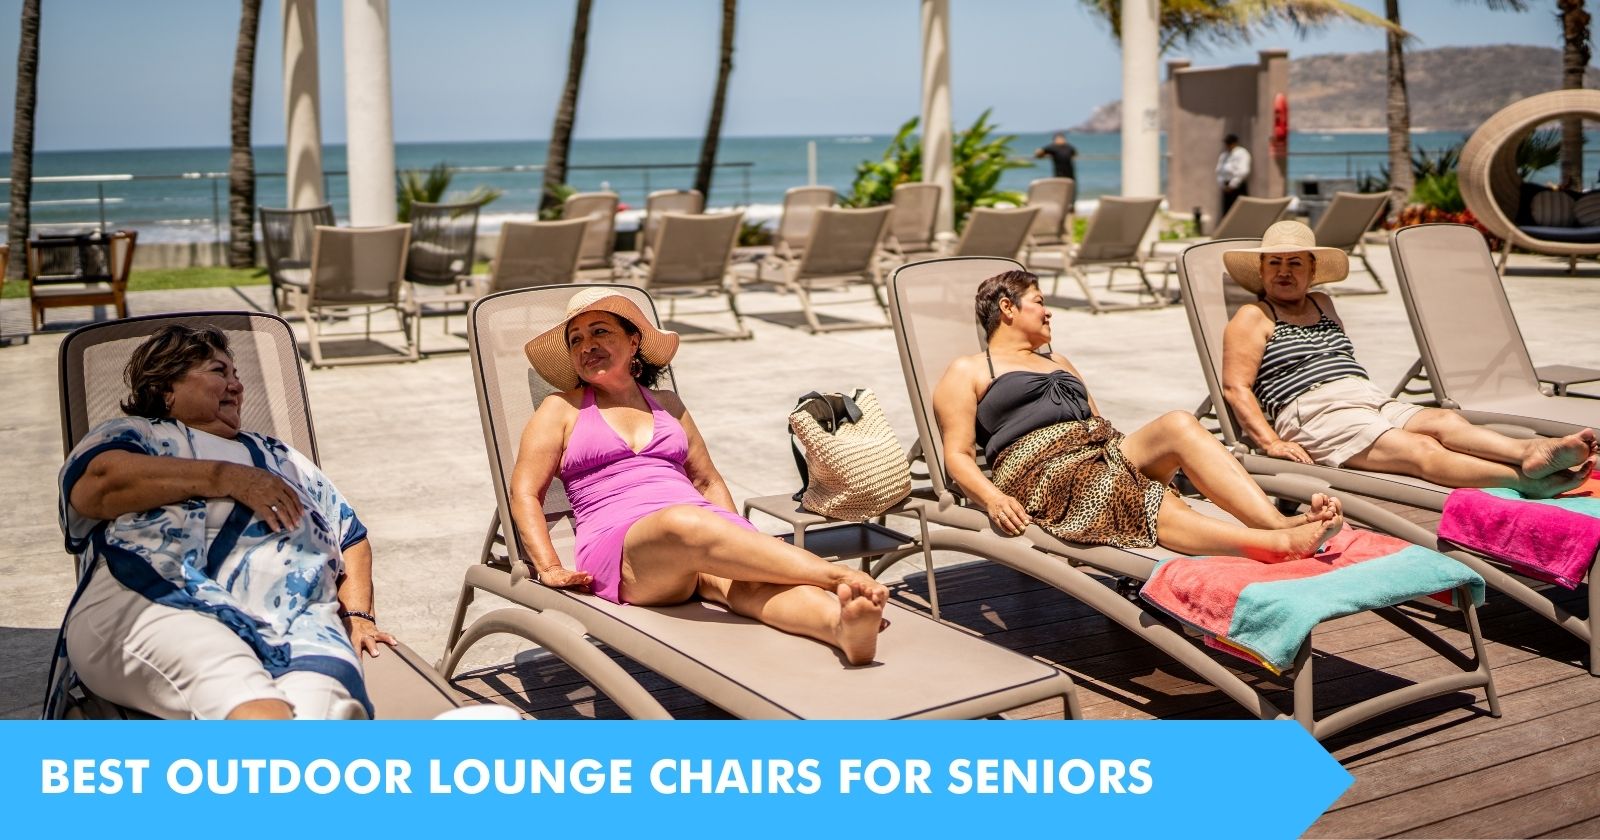 3 Best Outdoor Lounge Chairs for Seniors